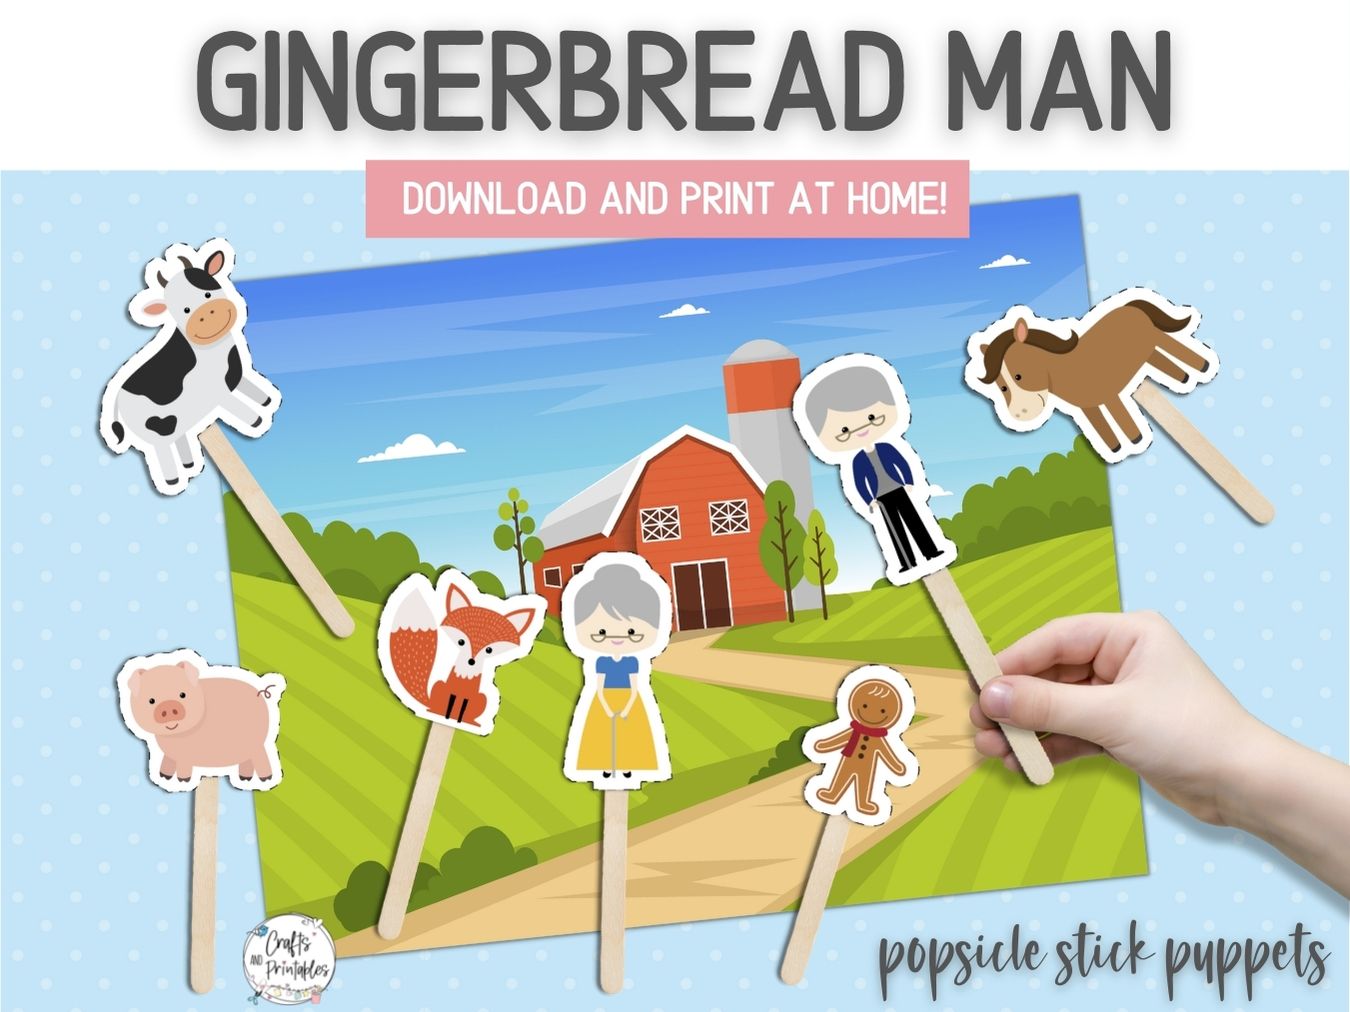 gingerbread-man-popsicle-stick-puppets-printable-crafts-and-printables-shop